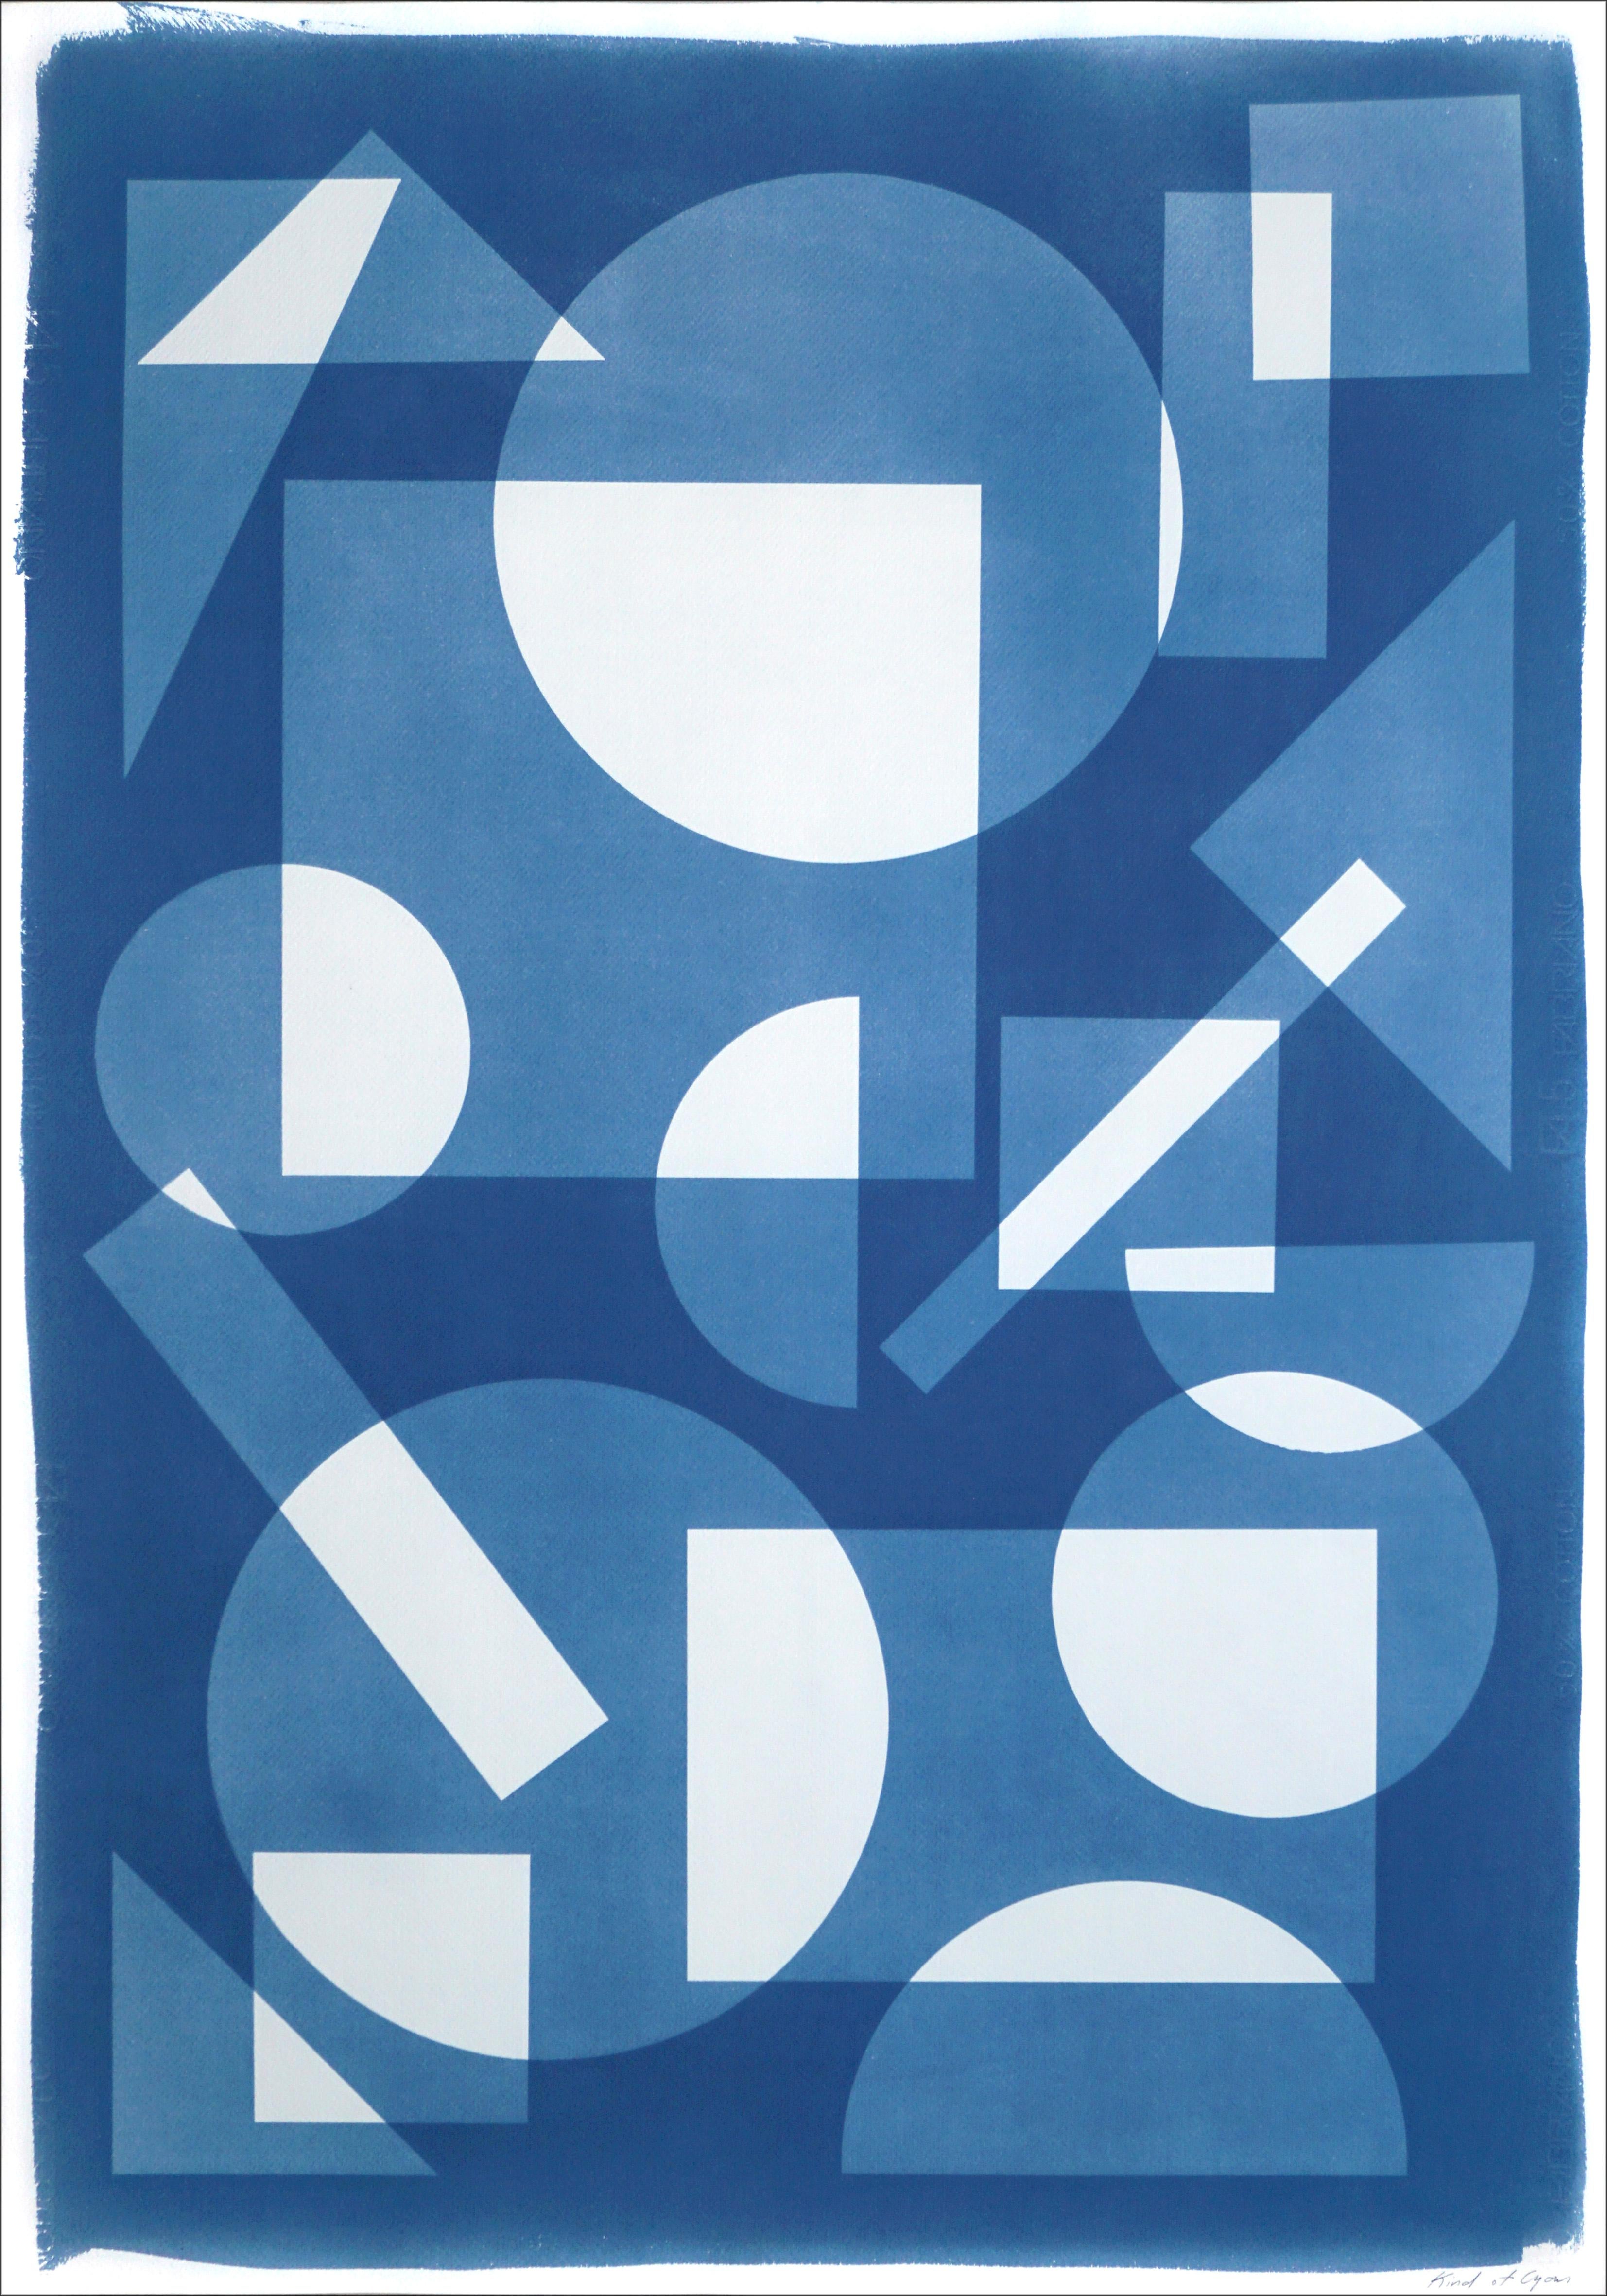 Kind of Cyan Abstract Print - Simple Shapes Floating in Space, White and Blue Geometry Constructivist Monotype